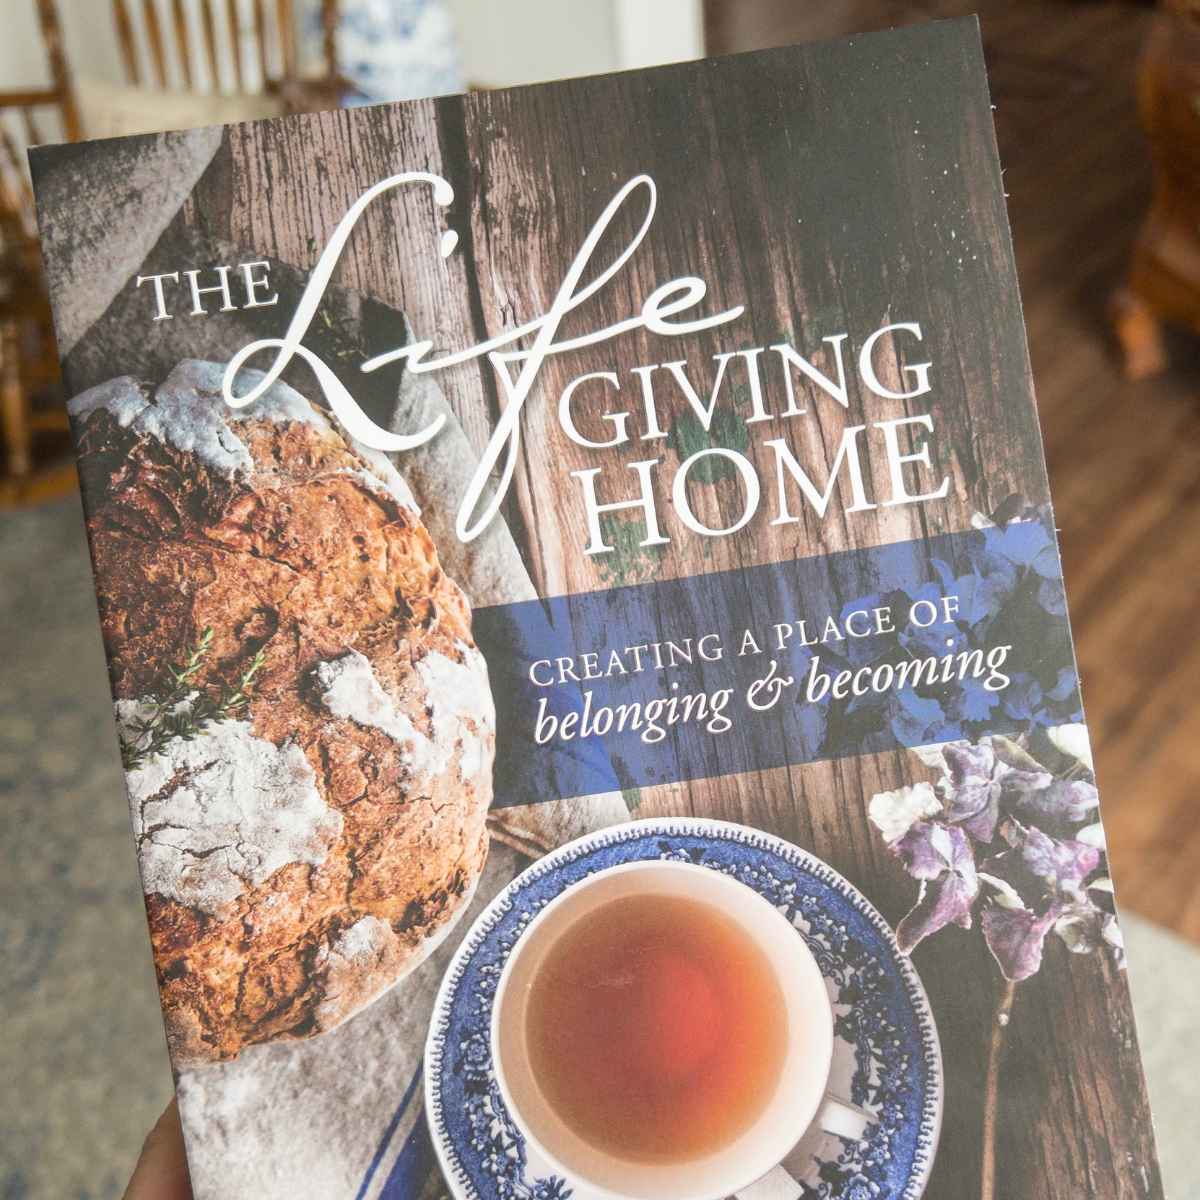 The life giving home book.